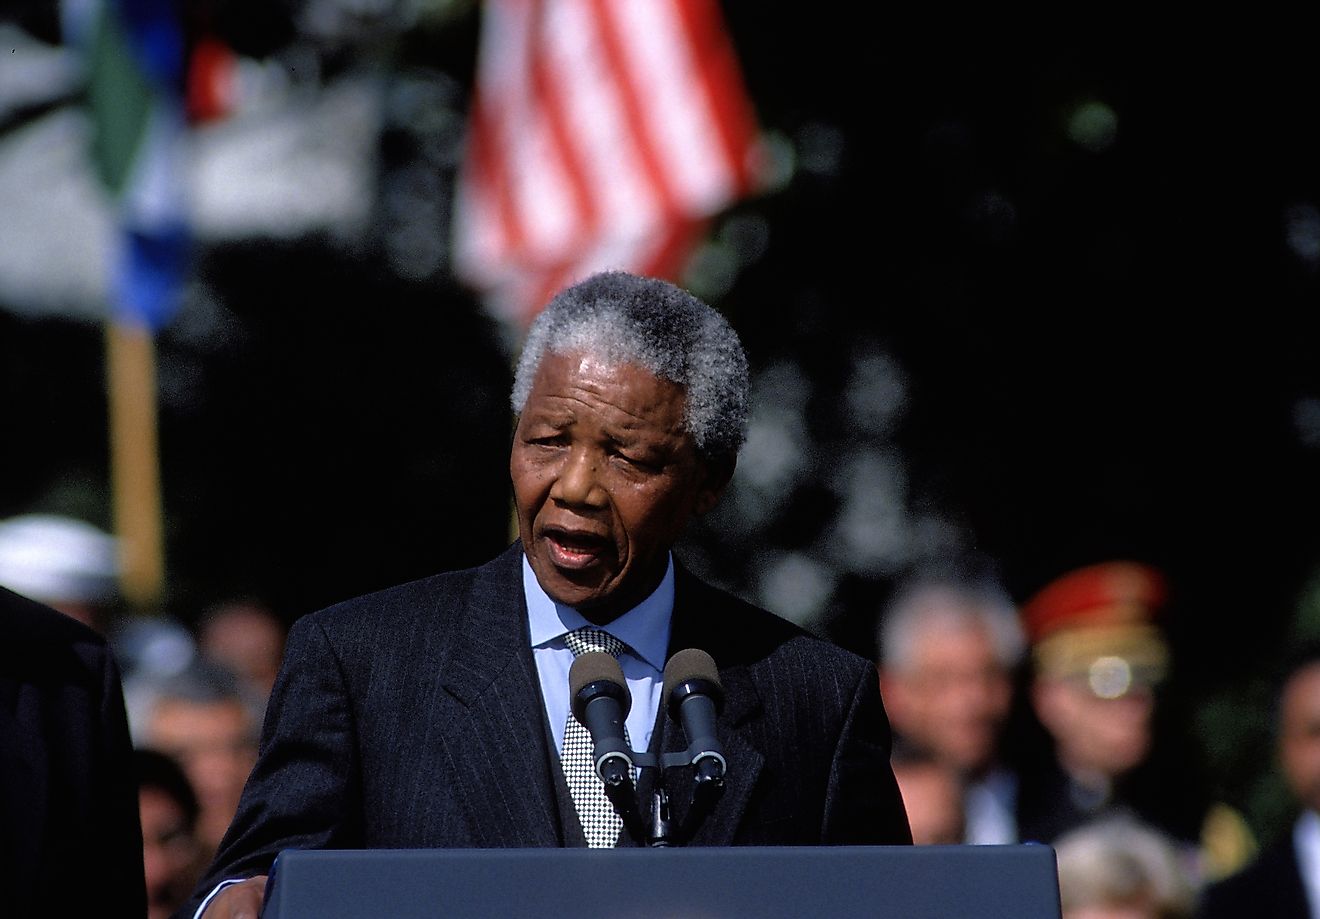 Washington, DC. USA, 4th October, 1994 President Nelson Mandela of South Africa delivers his speech on the South Lawn at the White House. Image credit: Mark Reinstein/Shutterstock.com